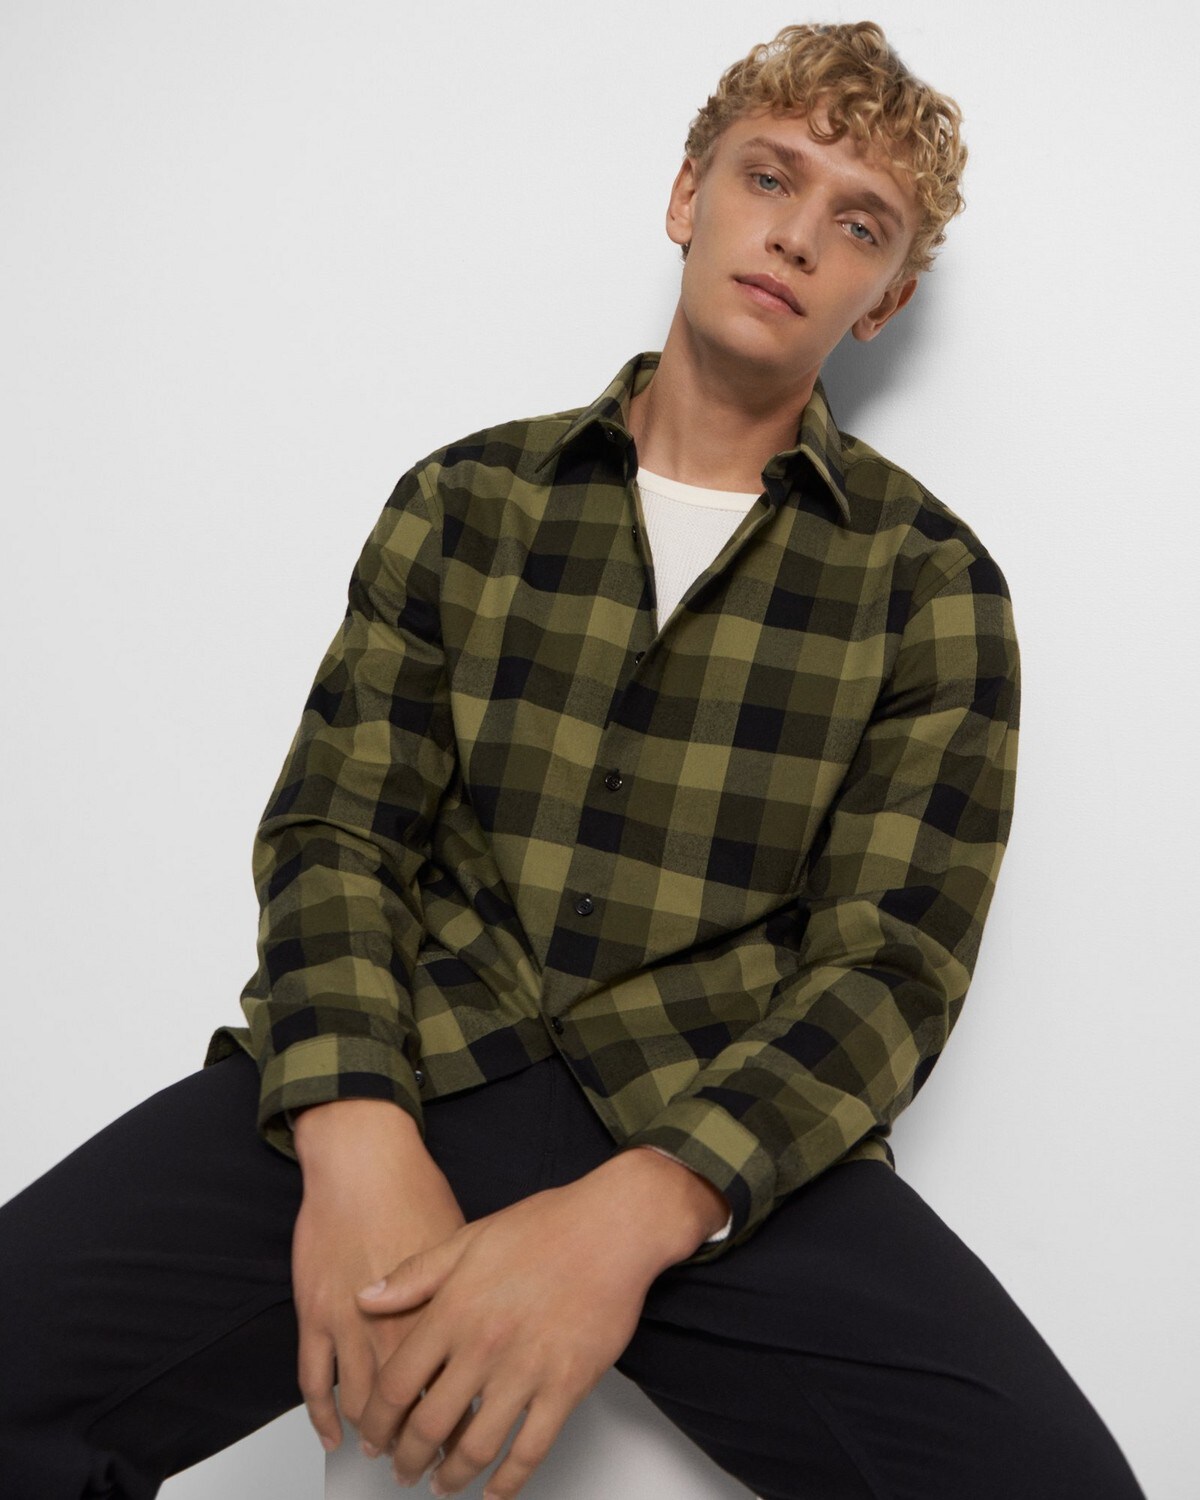 Standard-Fit Shirt in Overdyed Cotton Gingham